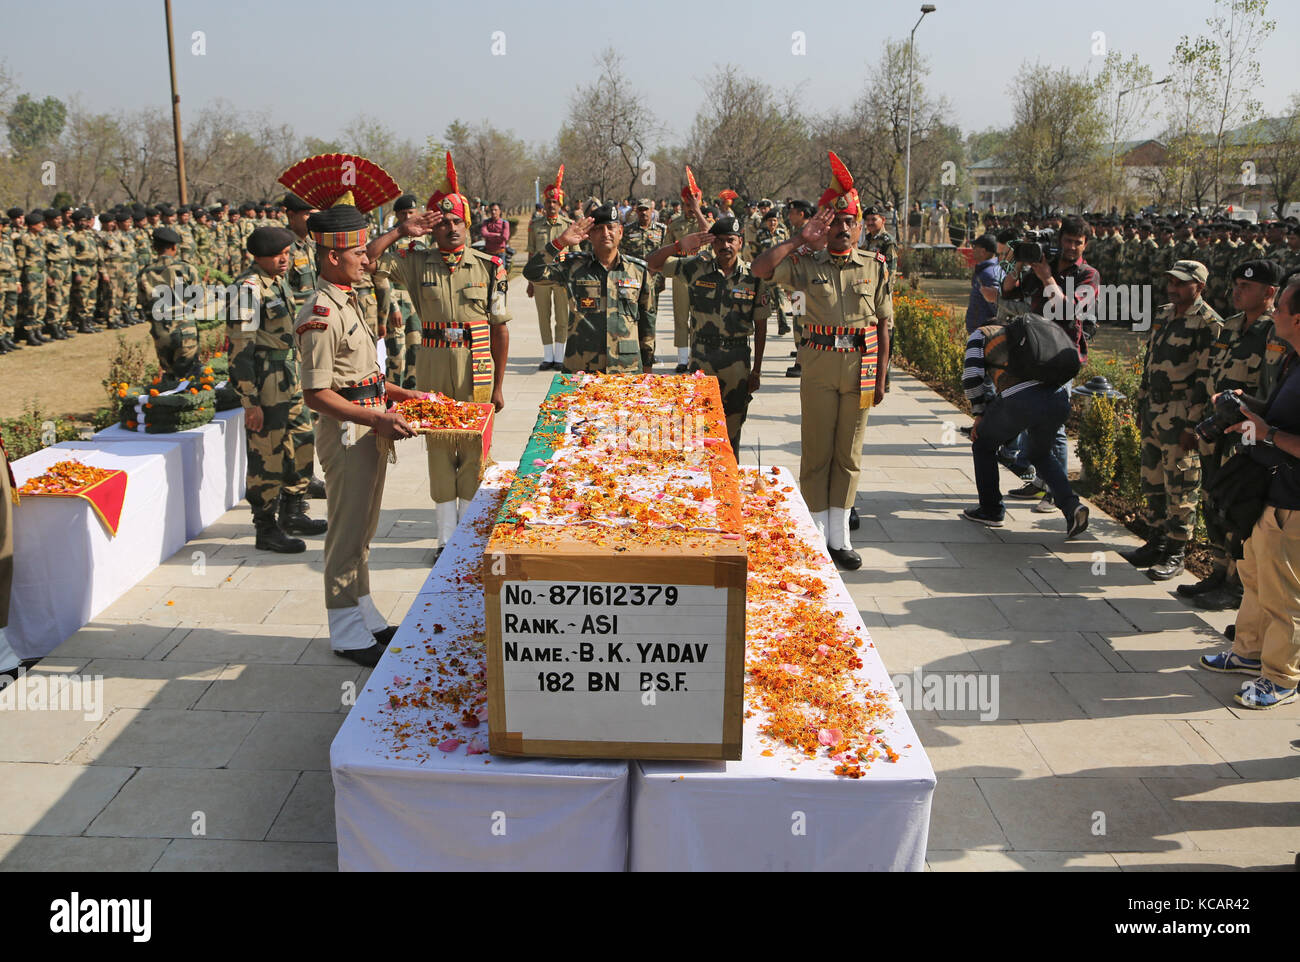 Srinagar, Kashmir. 4th October, 2017. Border guards of India's Border Security Force (BSF) salute to the coffin of their colleague who was killed in a militant attack during the wreath laying ceremony at a BSF base camp on the outskirts of Srinagar, summer capital of Kashmir. An Indian border guard and two militants were killed, while as three others and a policeman were wounded Tuesday in a predawn militant attack on India's BSF camp in restive Kashmir, police said. Credit: Javed Dar/Xinhua/Alamy Live News Stock Photo